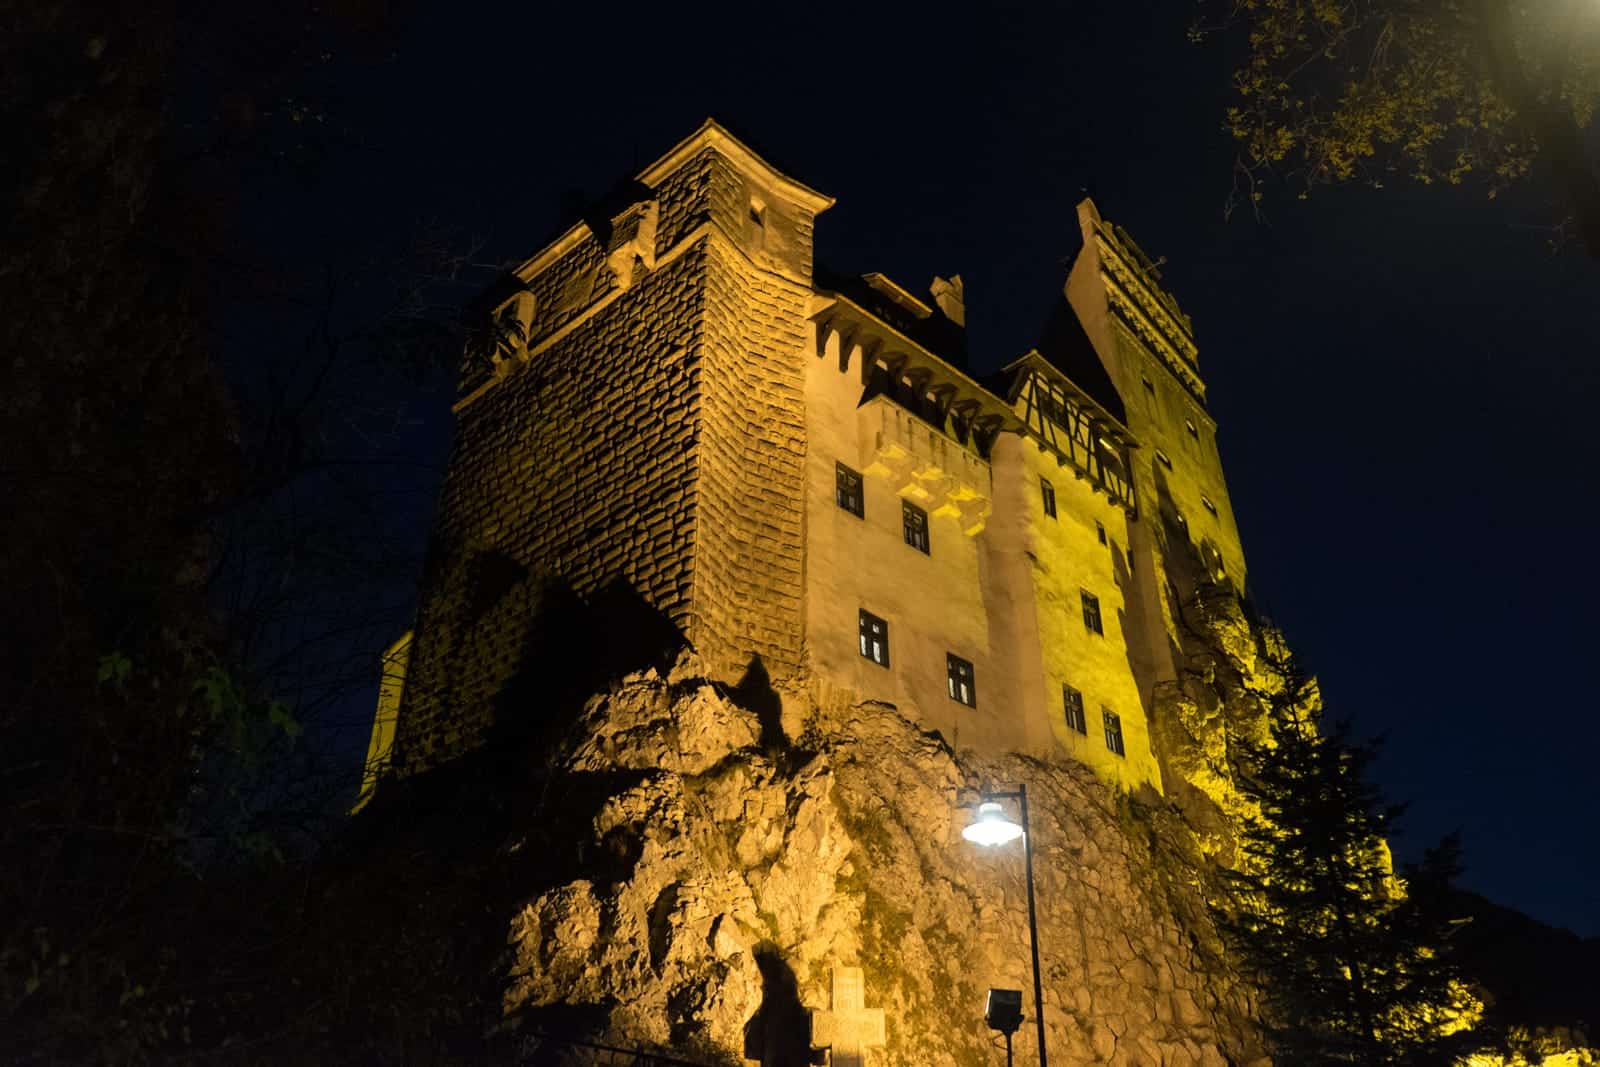 Bran Castle fortress structure that sits on a rock, in a golden glow at night in Transylvania, Romania